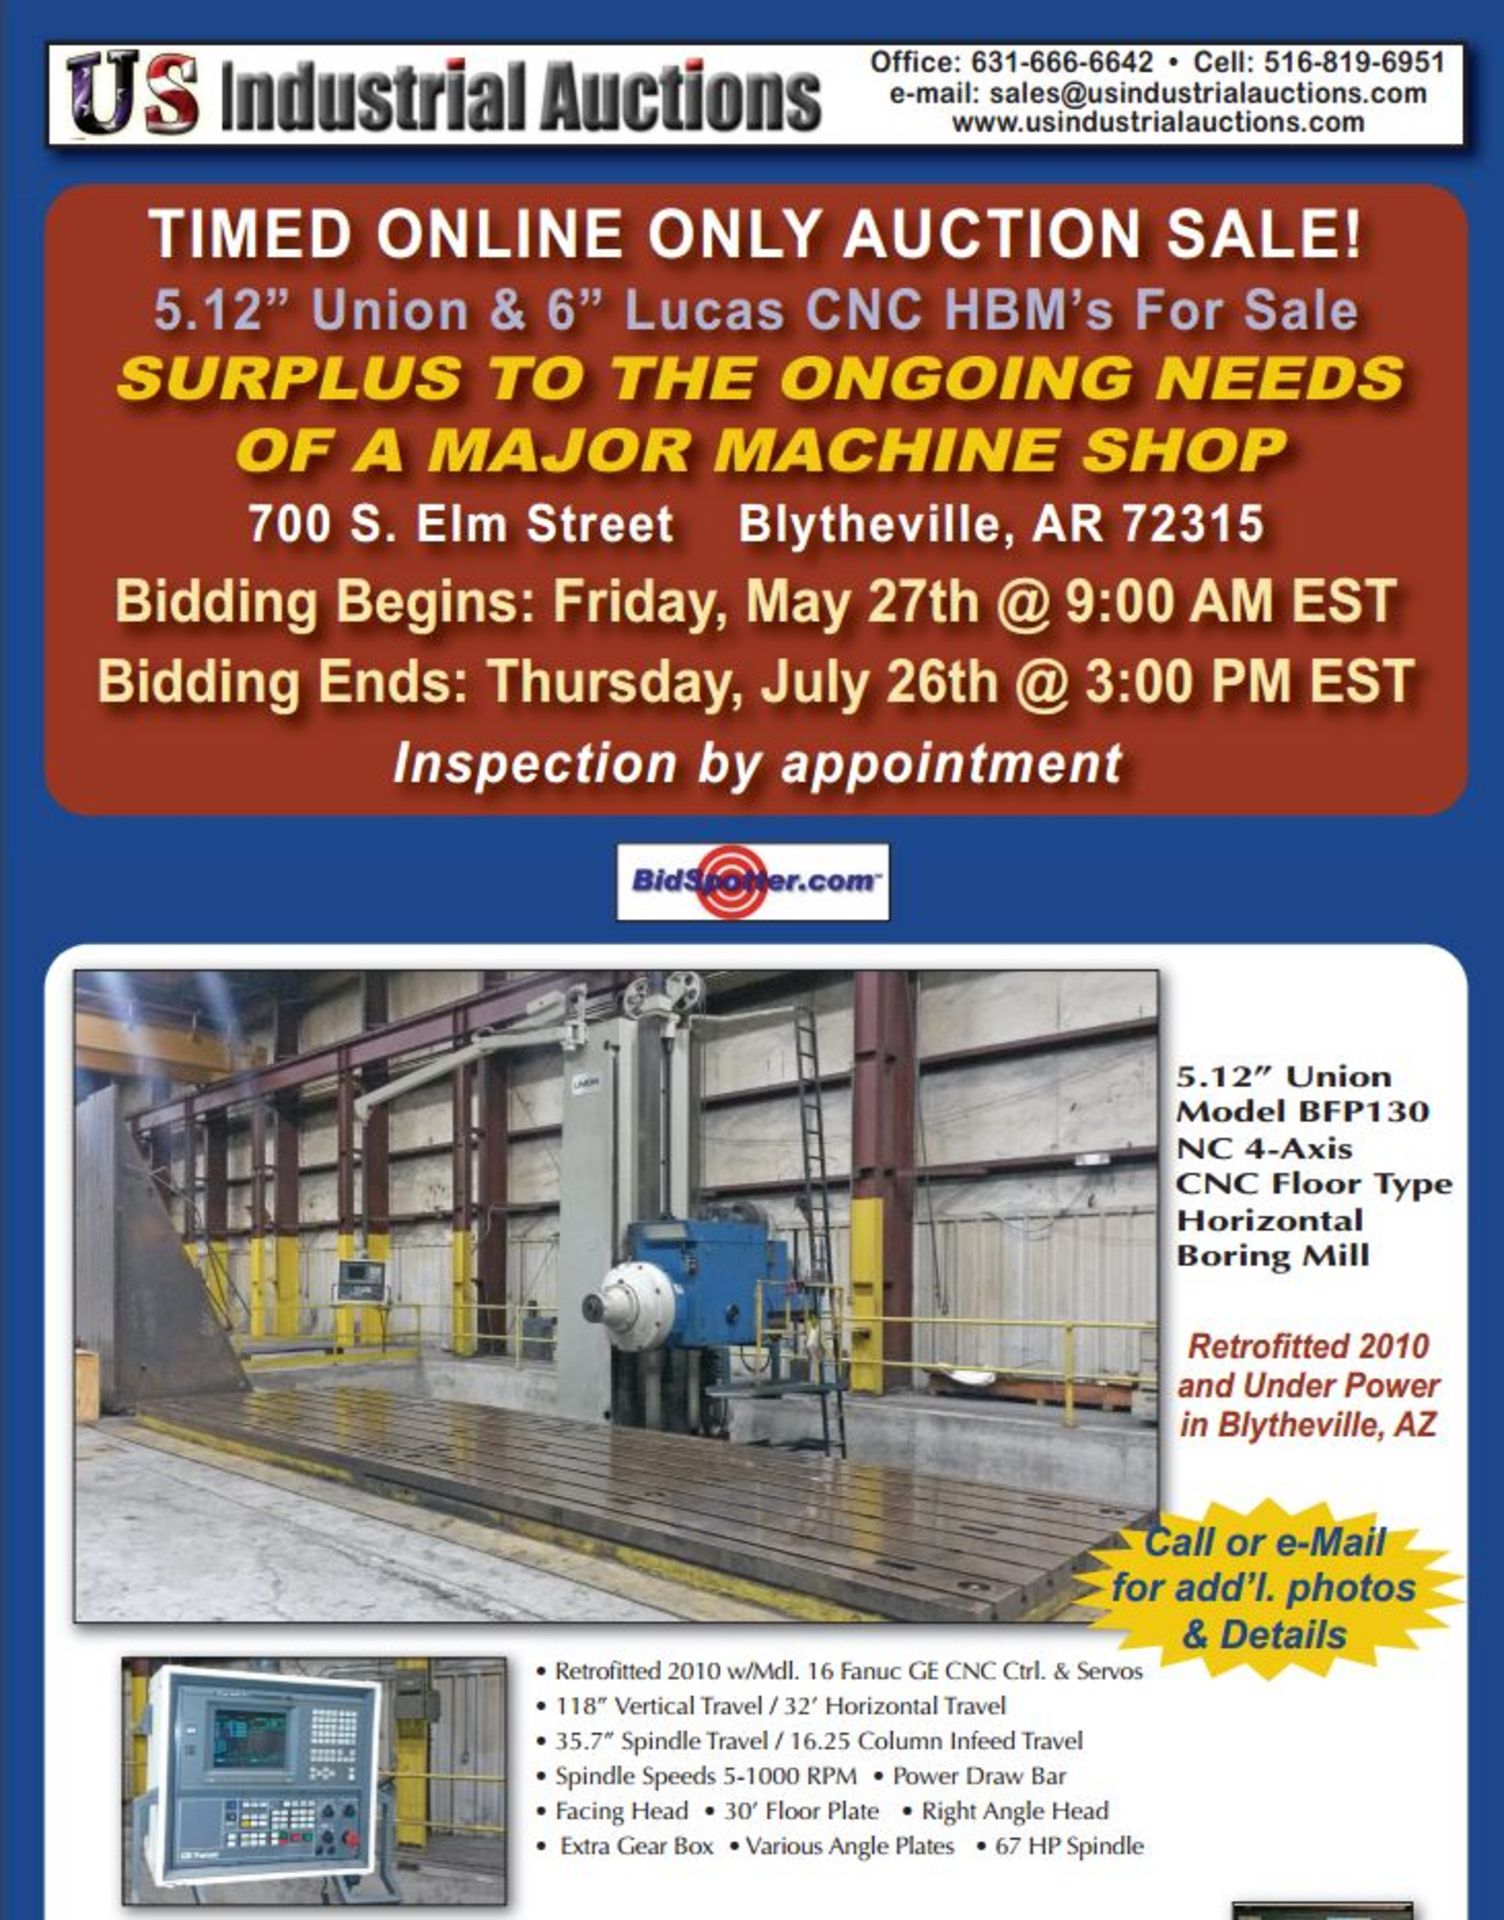 CLICK HERE TO VIEW THE AUCTION BROCHURE